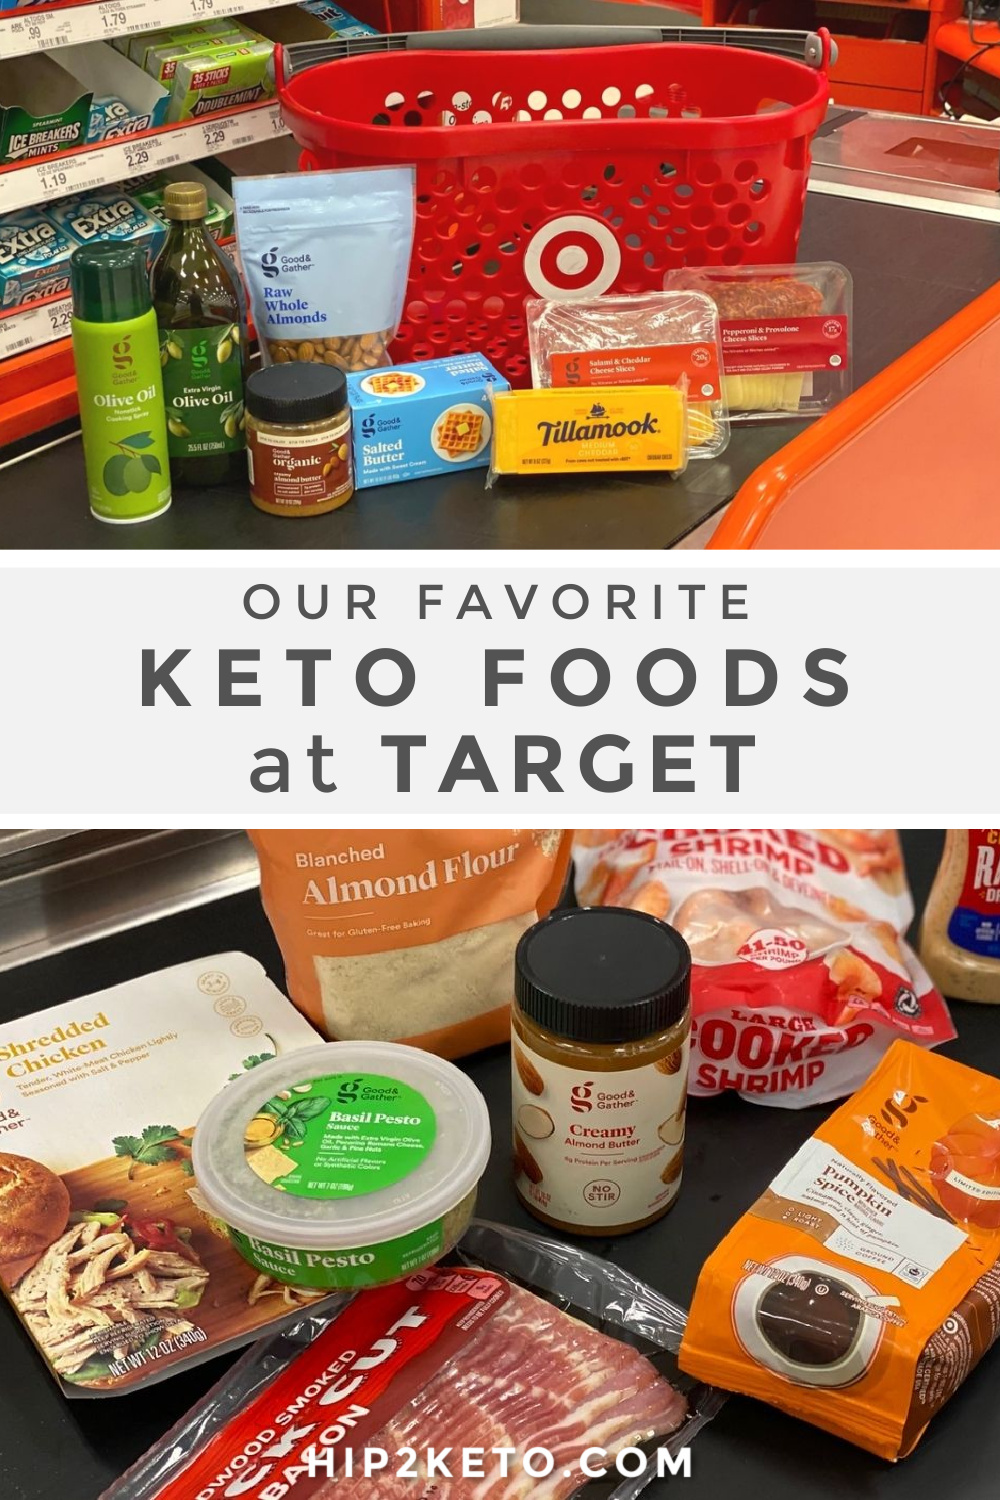 20 Keto Foods You'll Find ONLY at Target | Hip2Keto